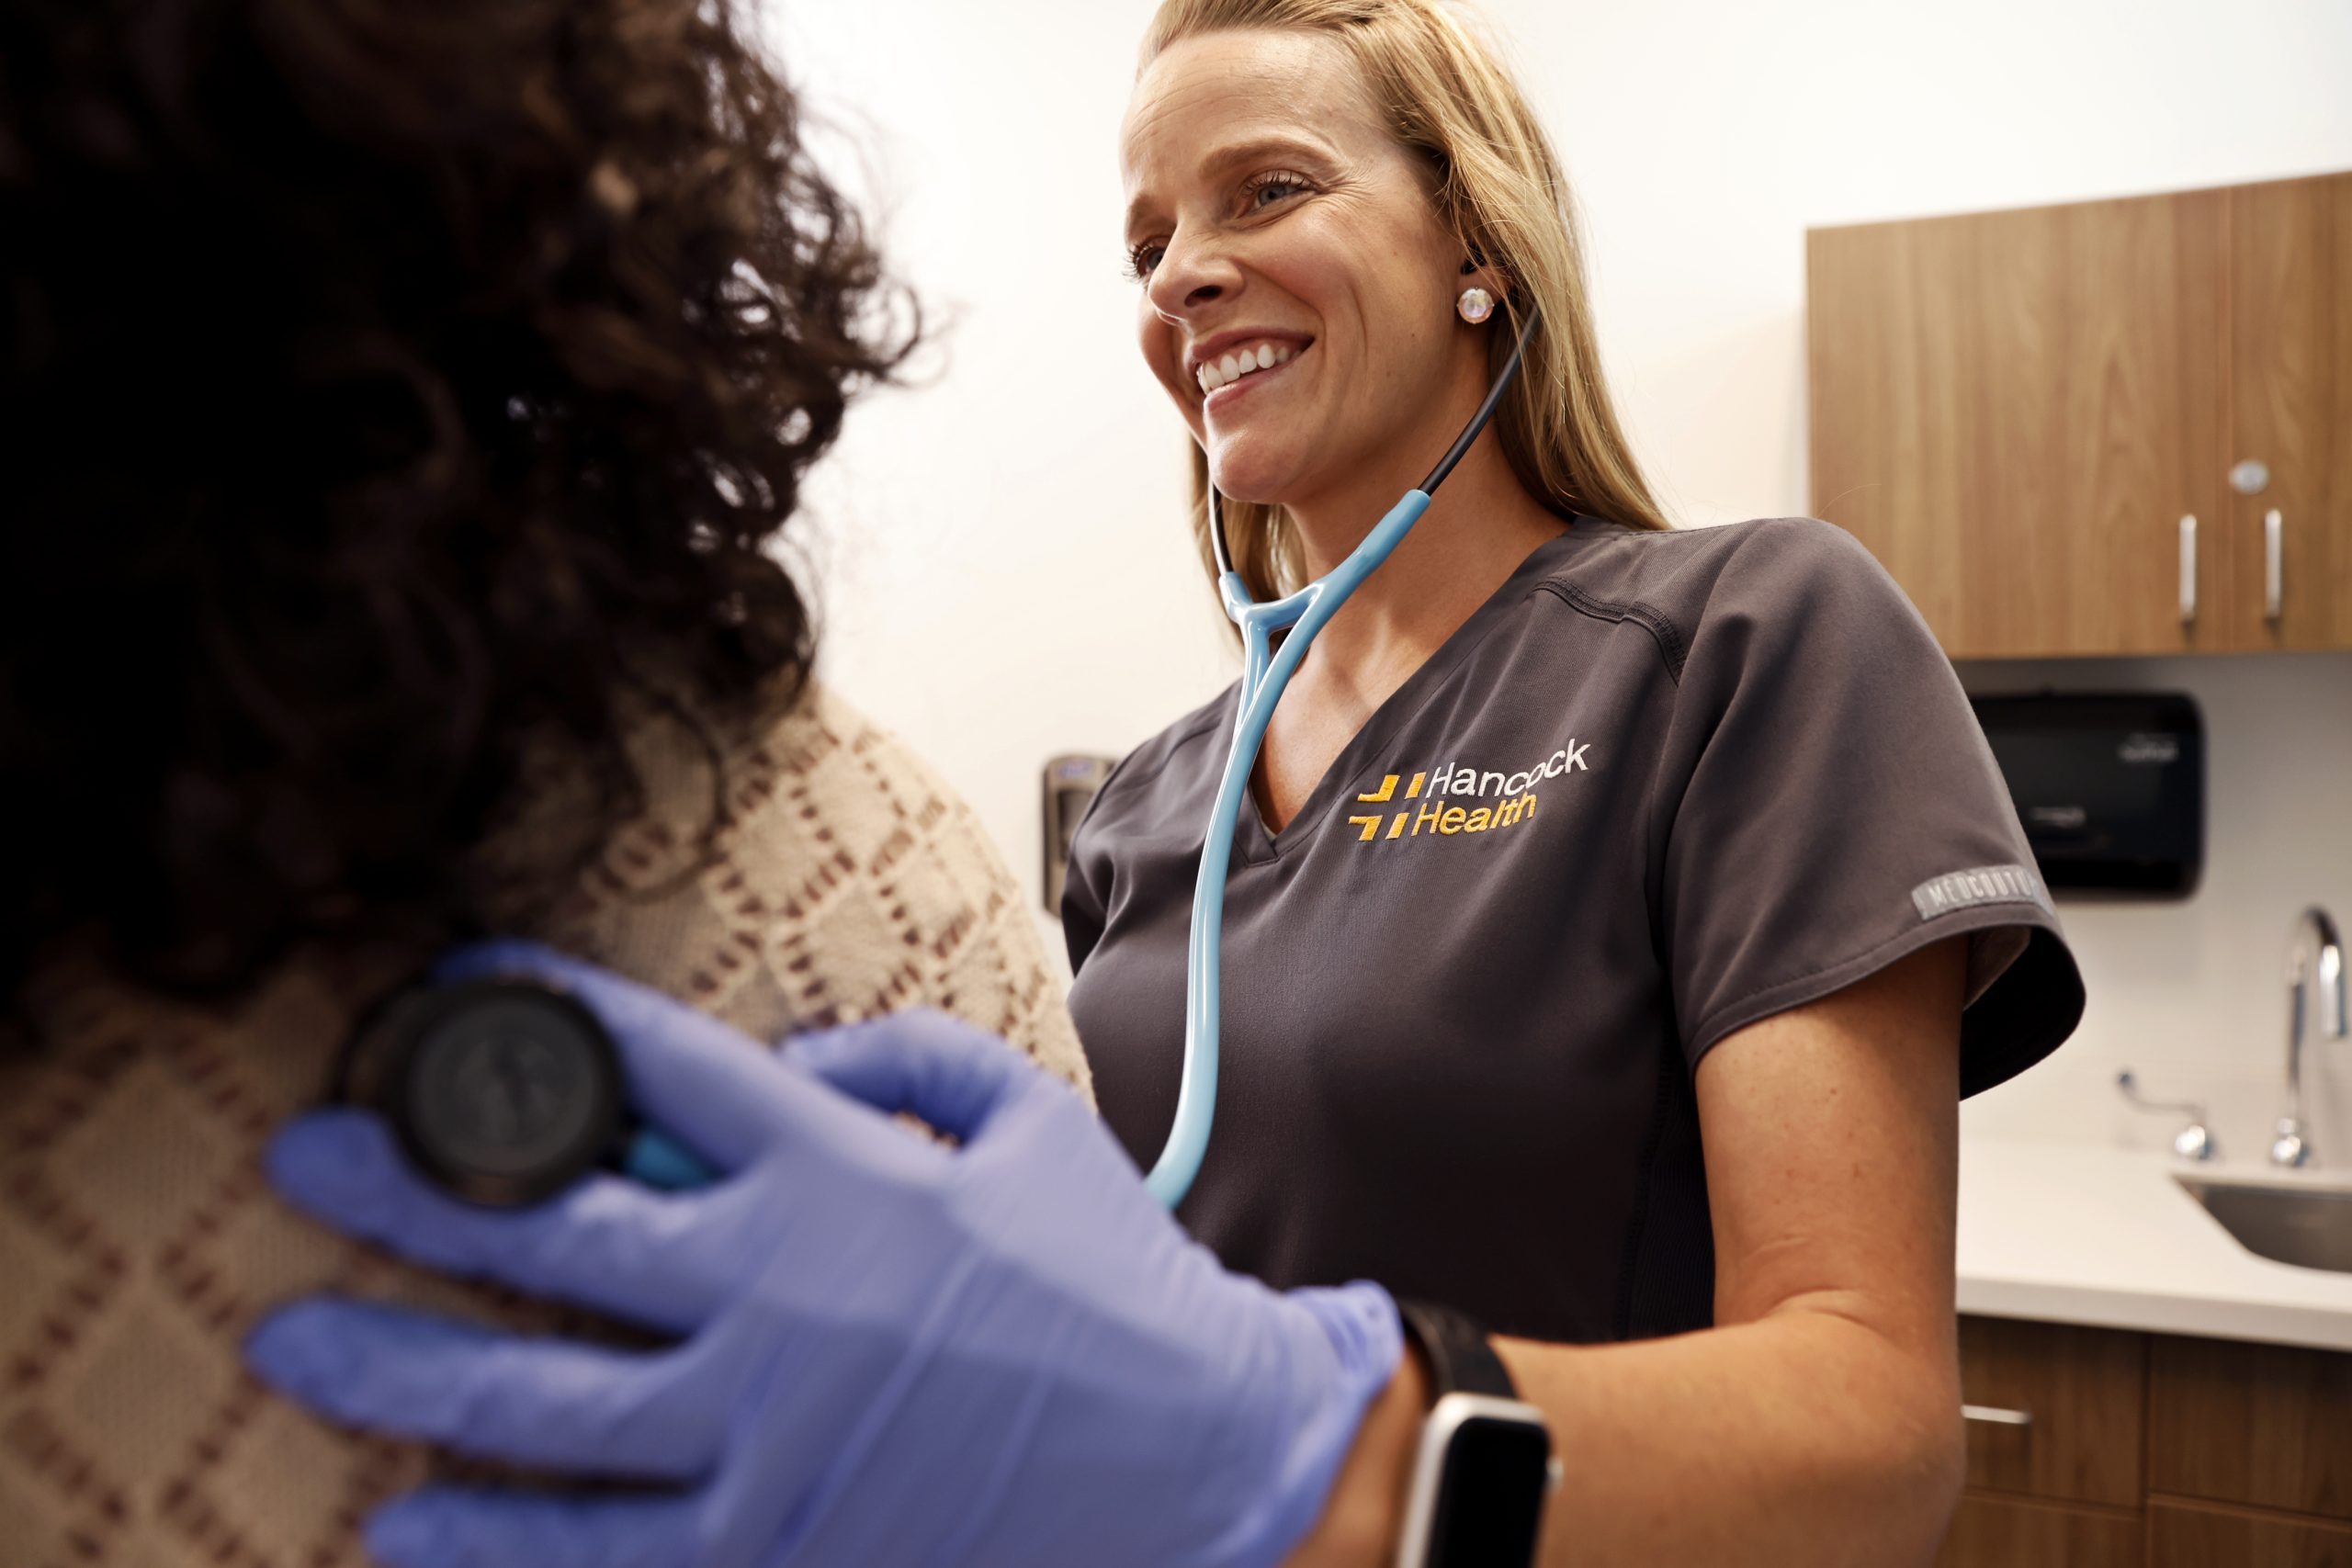 smiling nurse practitioner listening to patient's breathing with stethoscope